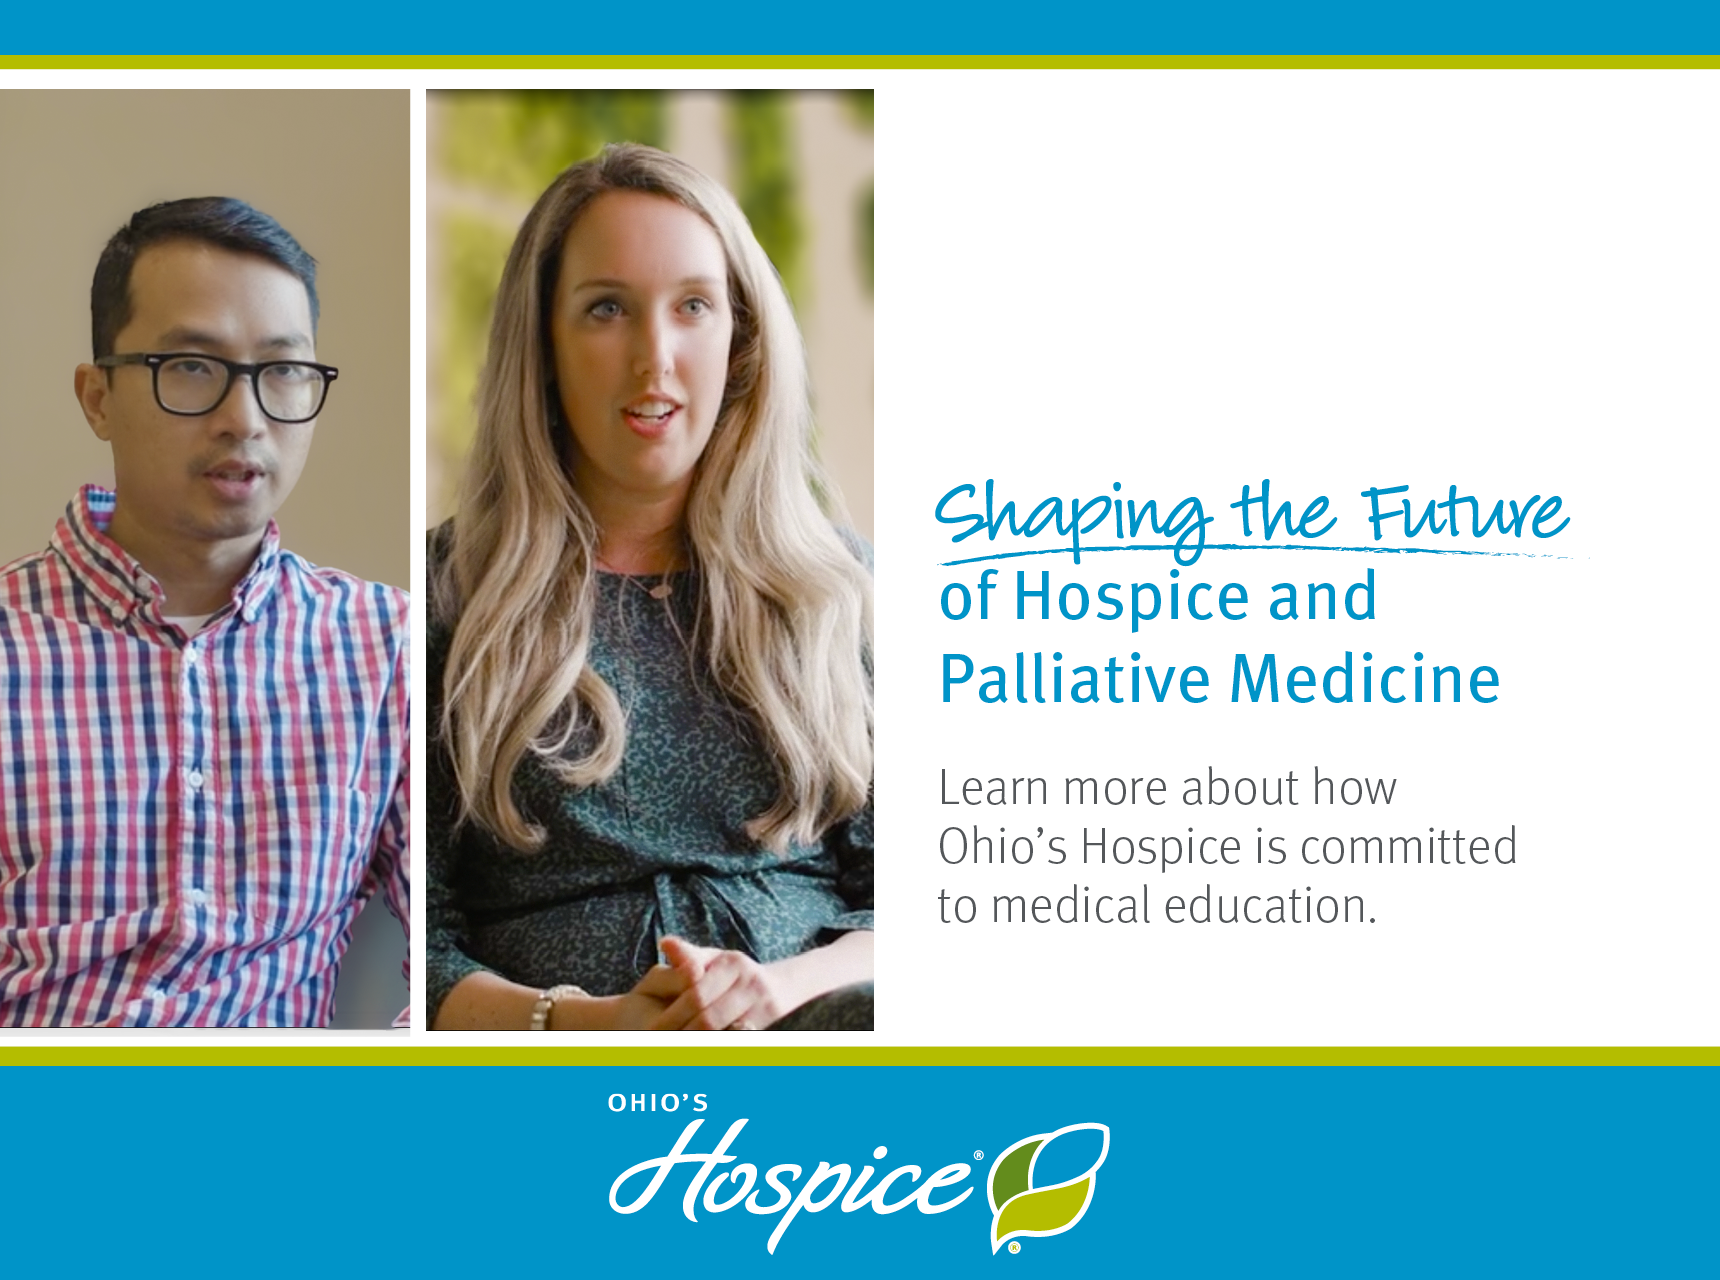 Shaping the Future of Hospice and Palliative Medicine. Learn more about how Ohio's Hospice is committed to medical education.